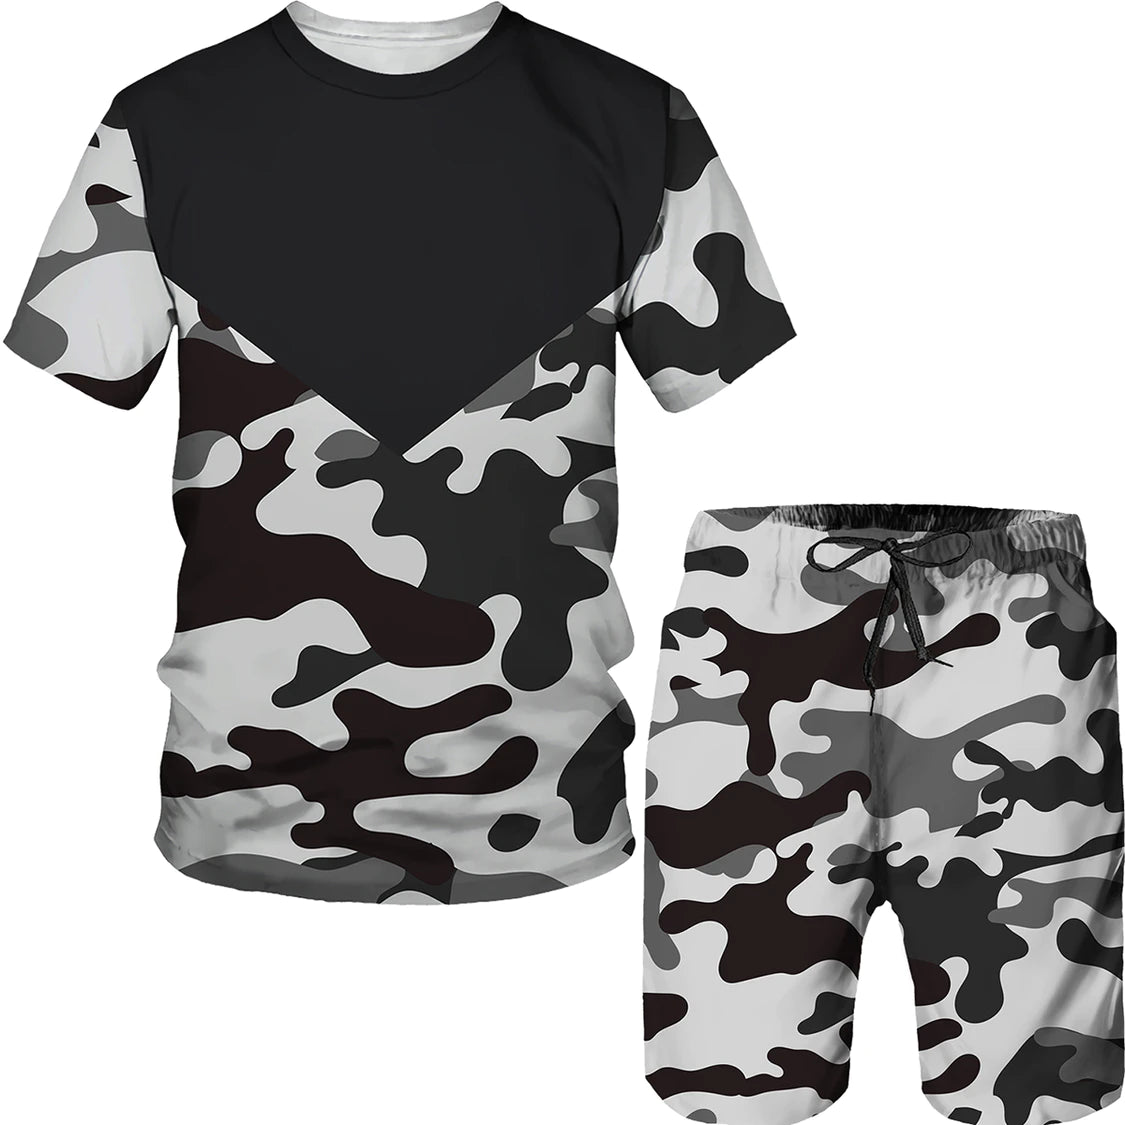 Camouflage Beach Set Men New Summer Tshirt Shorts Two Pieces Set 3D Printed Tracksuit Men's Oversized Clothes Vintage Streetwear